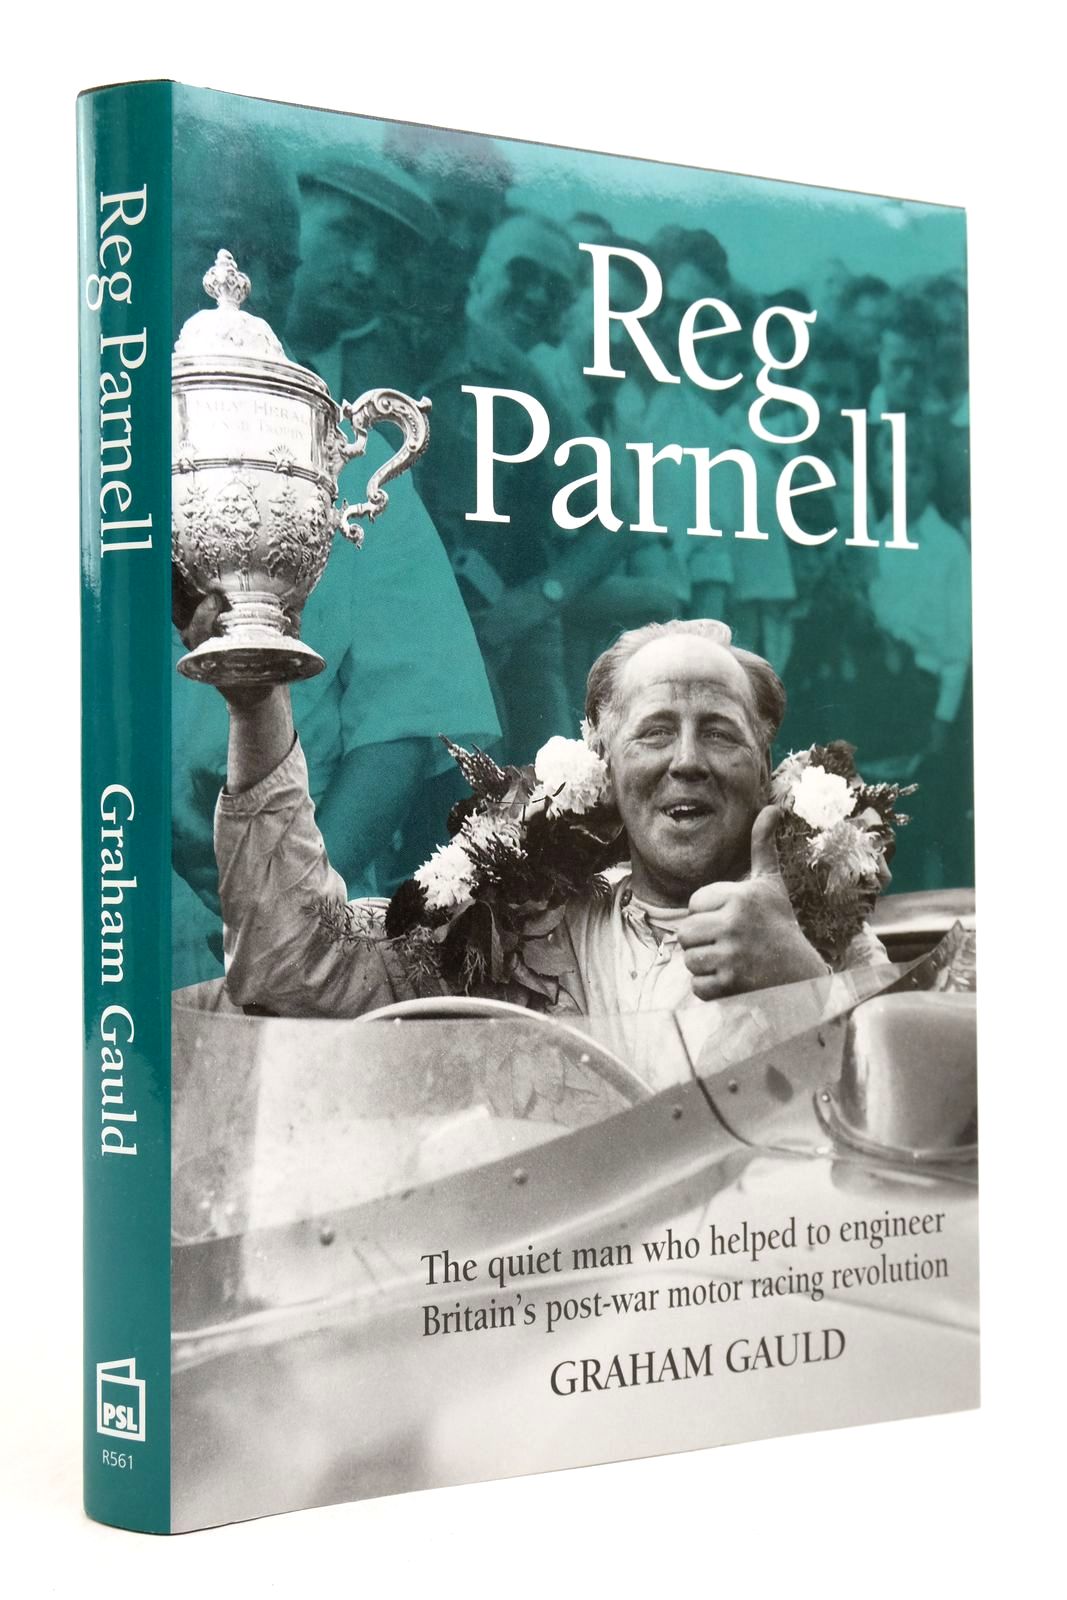 Photo of REG PARNELL written by Gauld, Graham published by Patrick Stephens Limited (STOCK CODE: 2139862)  for sale by Stella & Rose's Books